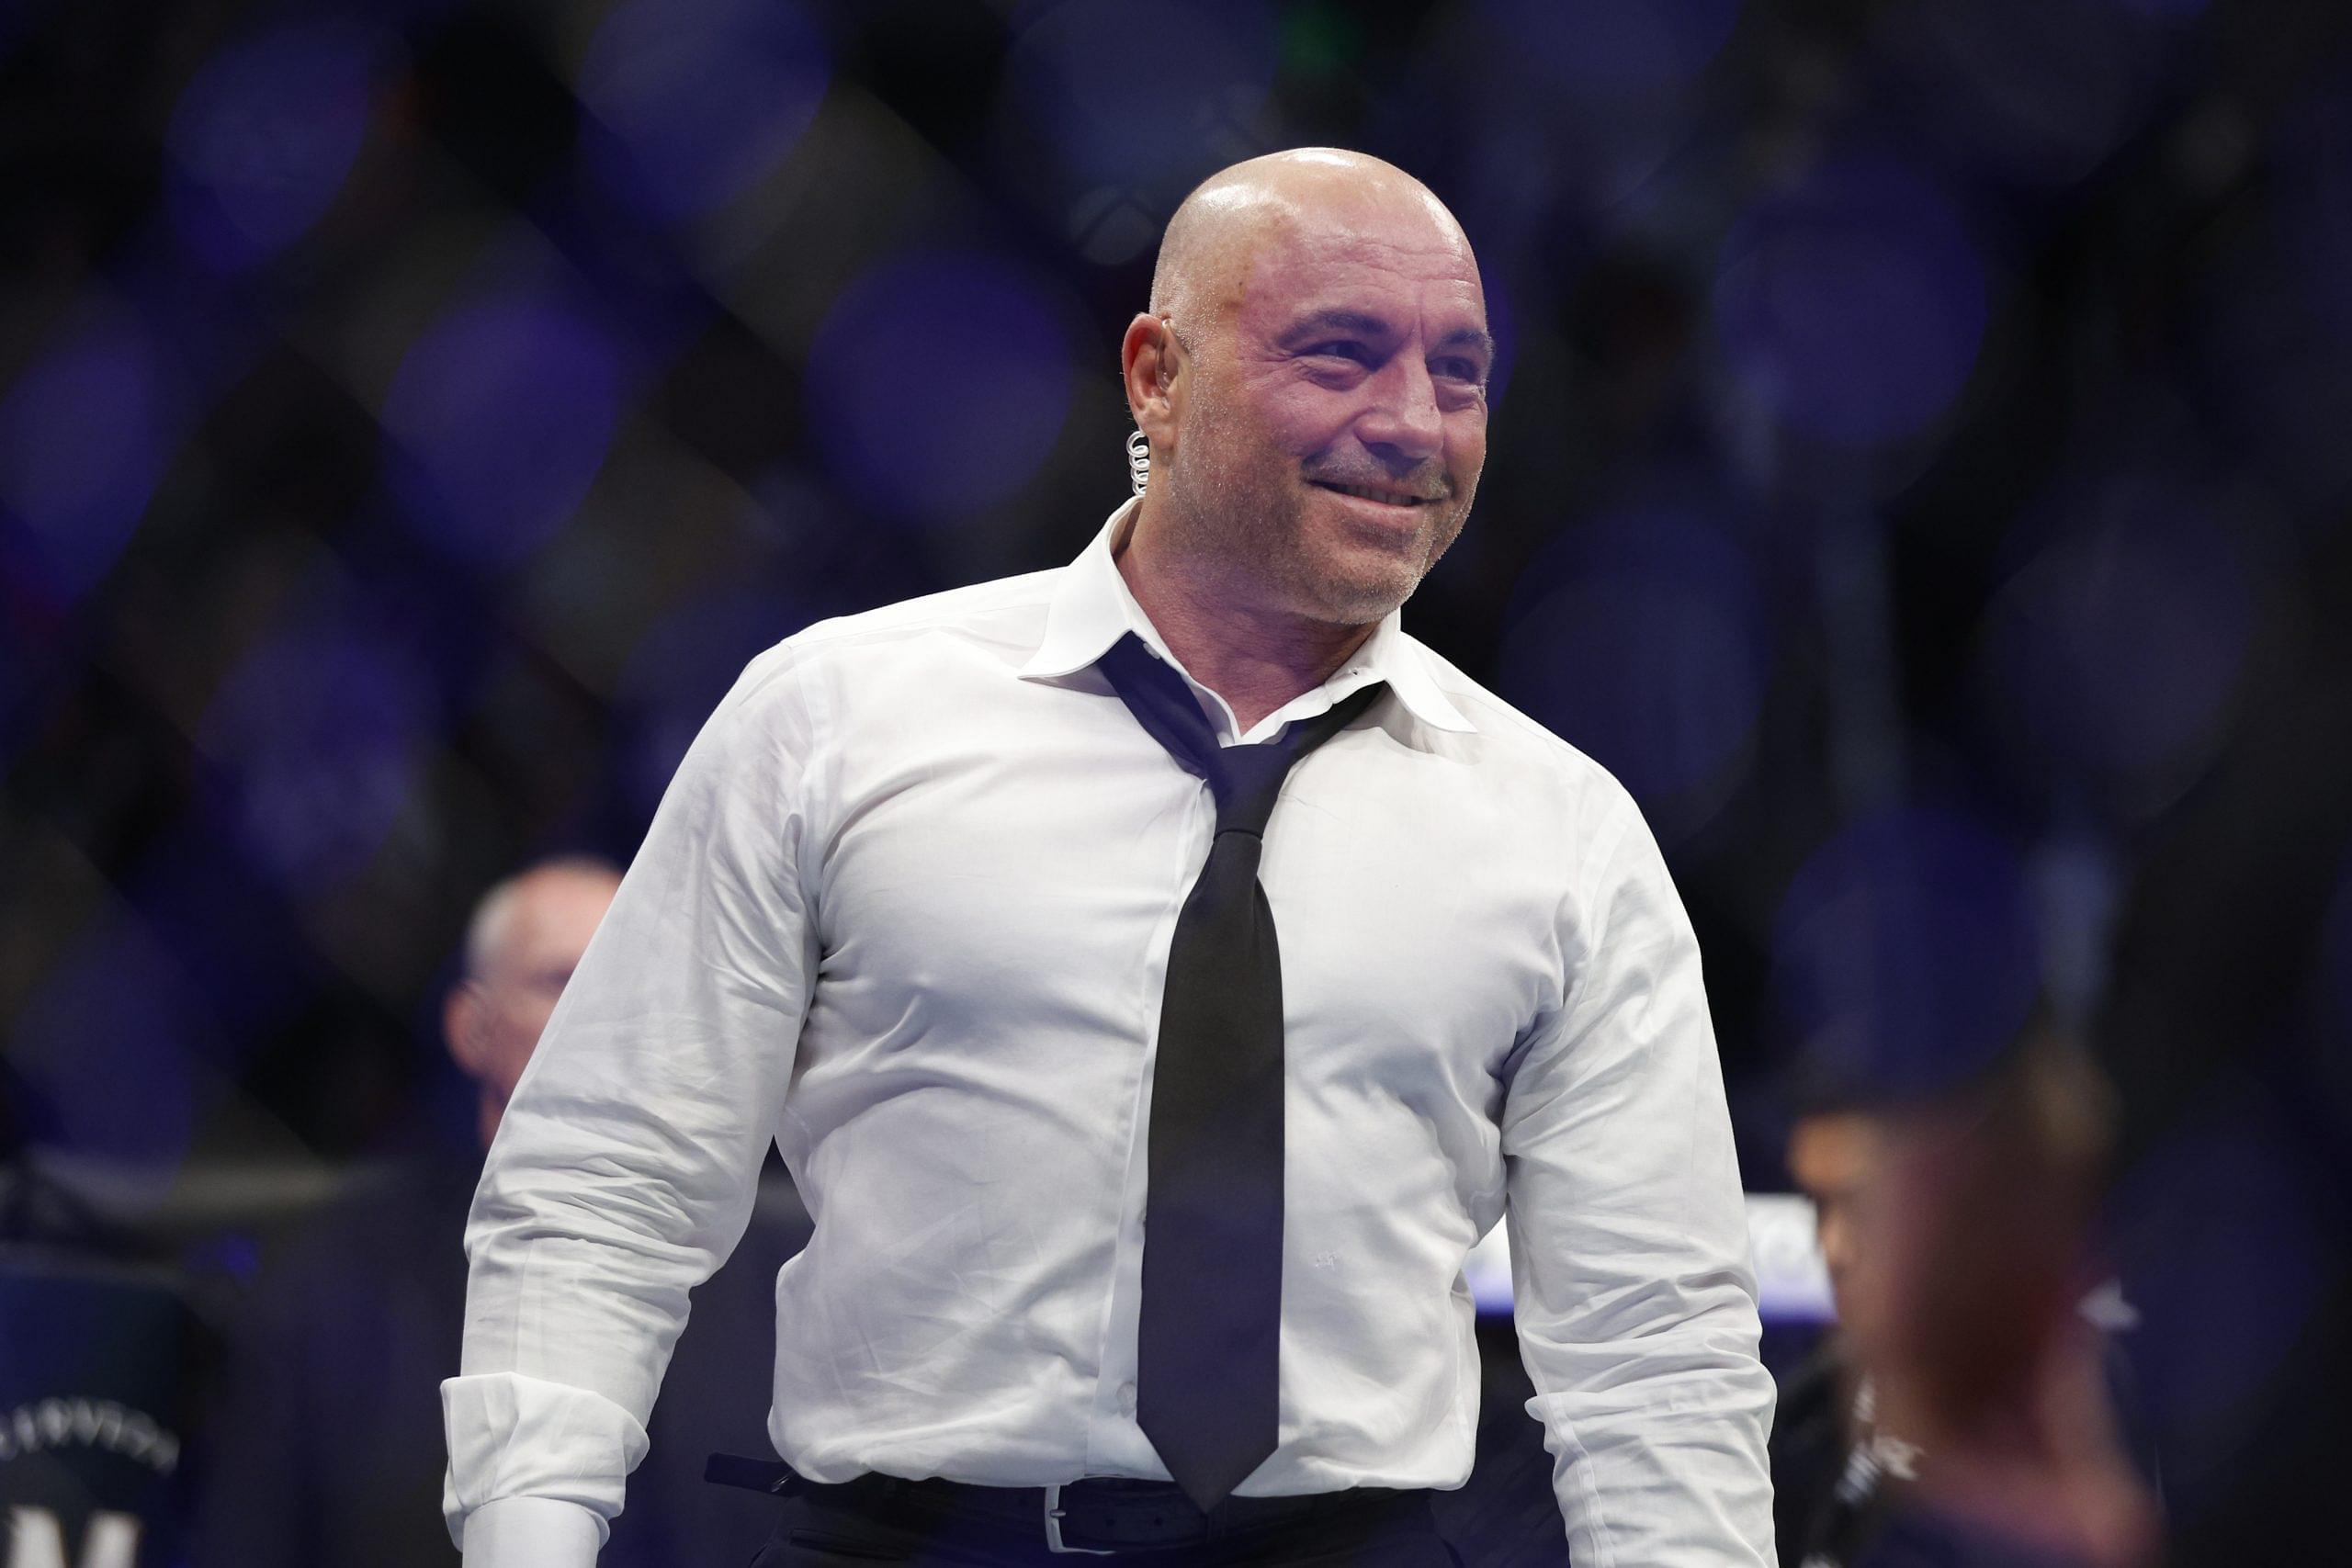 55-Year-Old Cannabis Advocate and Avid Cigar Smoker Joe Rogan Once Described Why He Avoids Cigarettes: “I Think We Could All Get…”